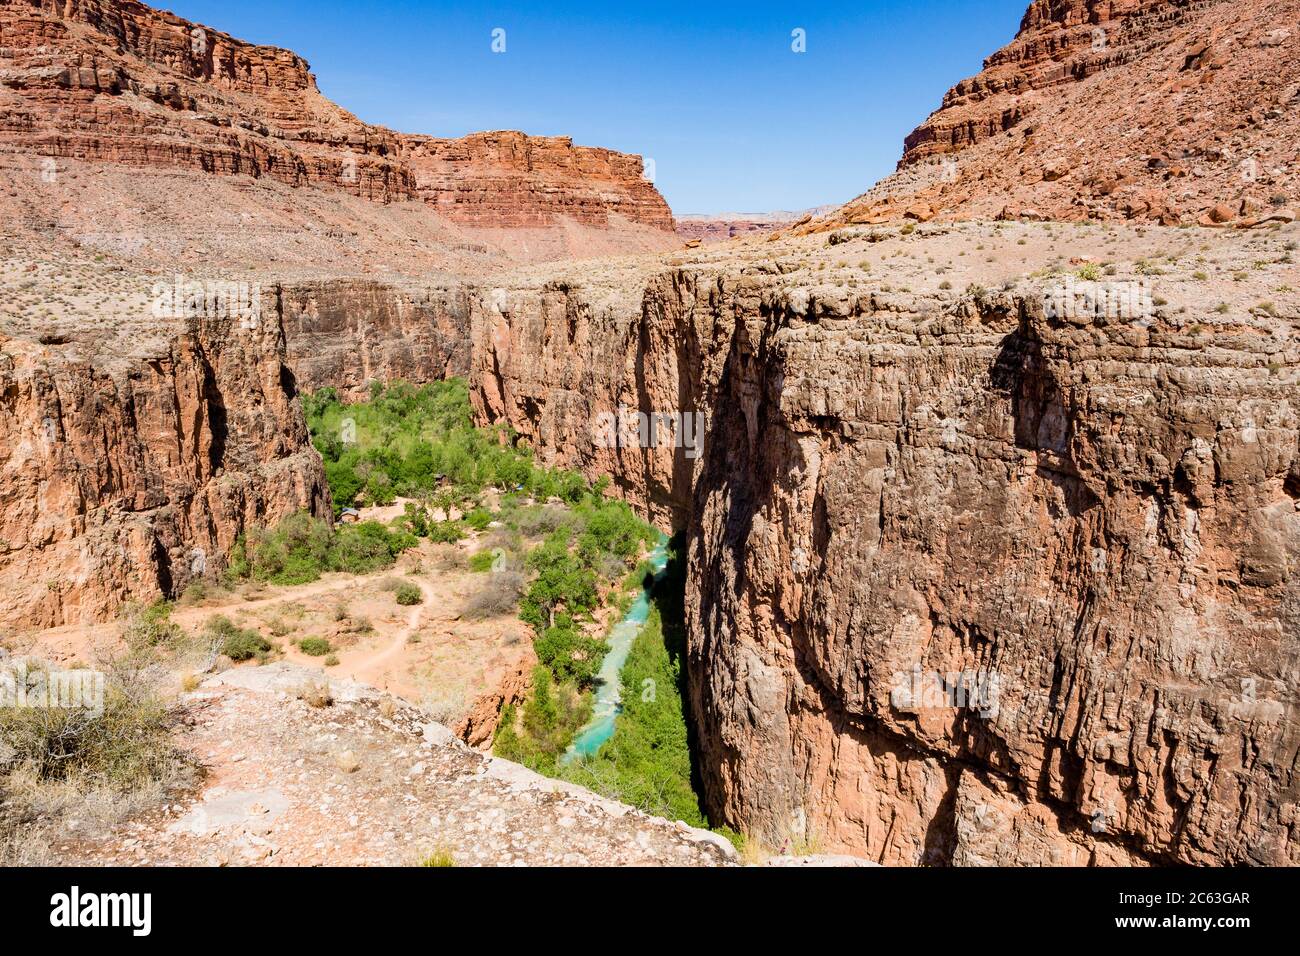 Havasu Creek flows through camping area which starts in the trees where the creek disappears from view. Campground owned by Havasupai Indian Tribe, AZ. Stock Photo